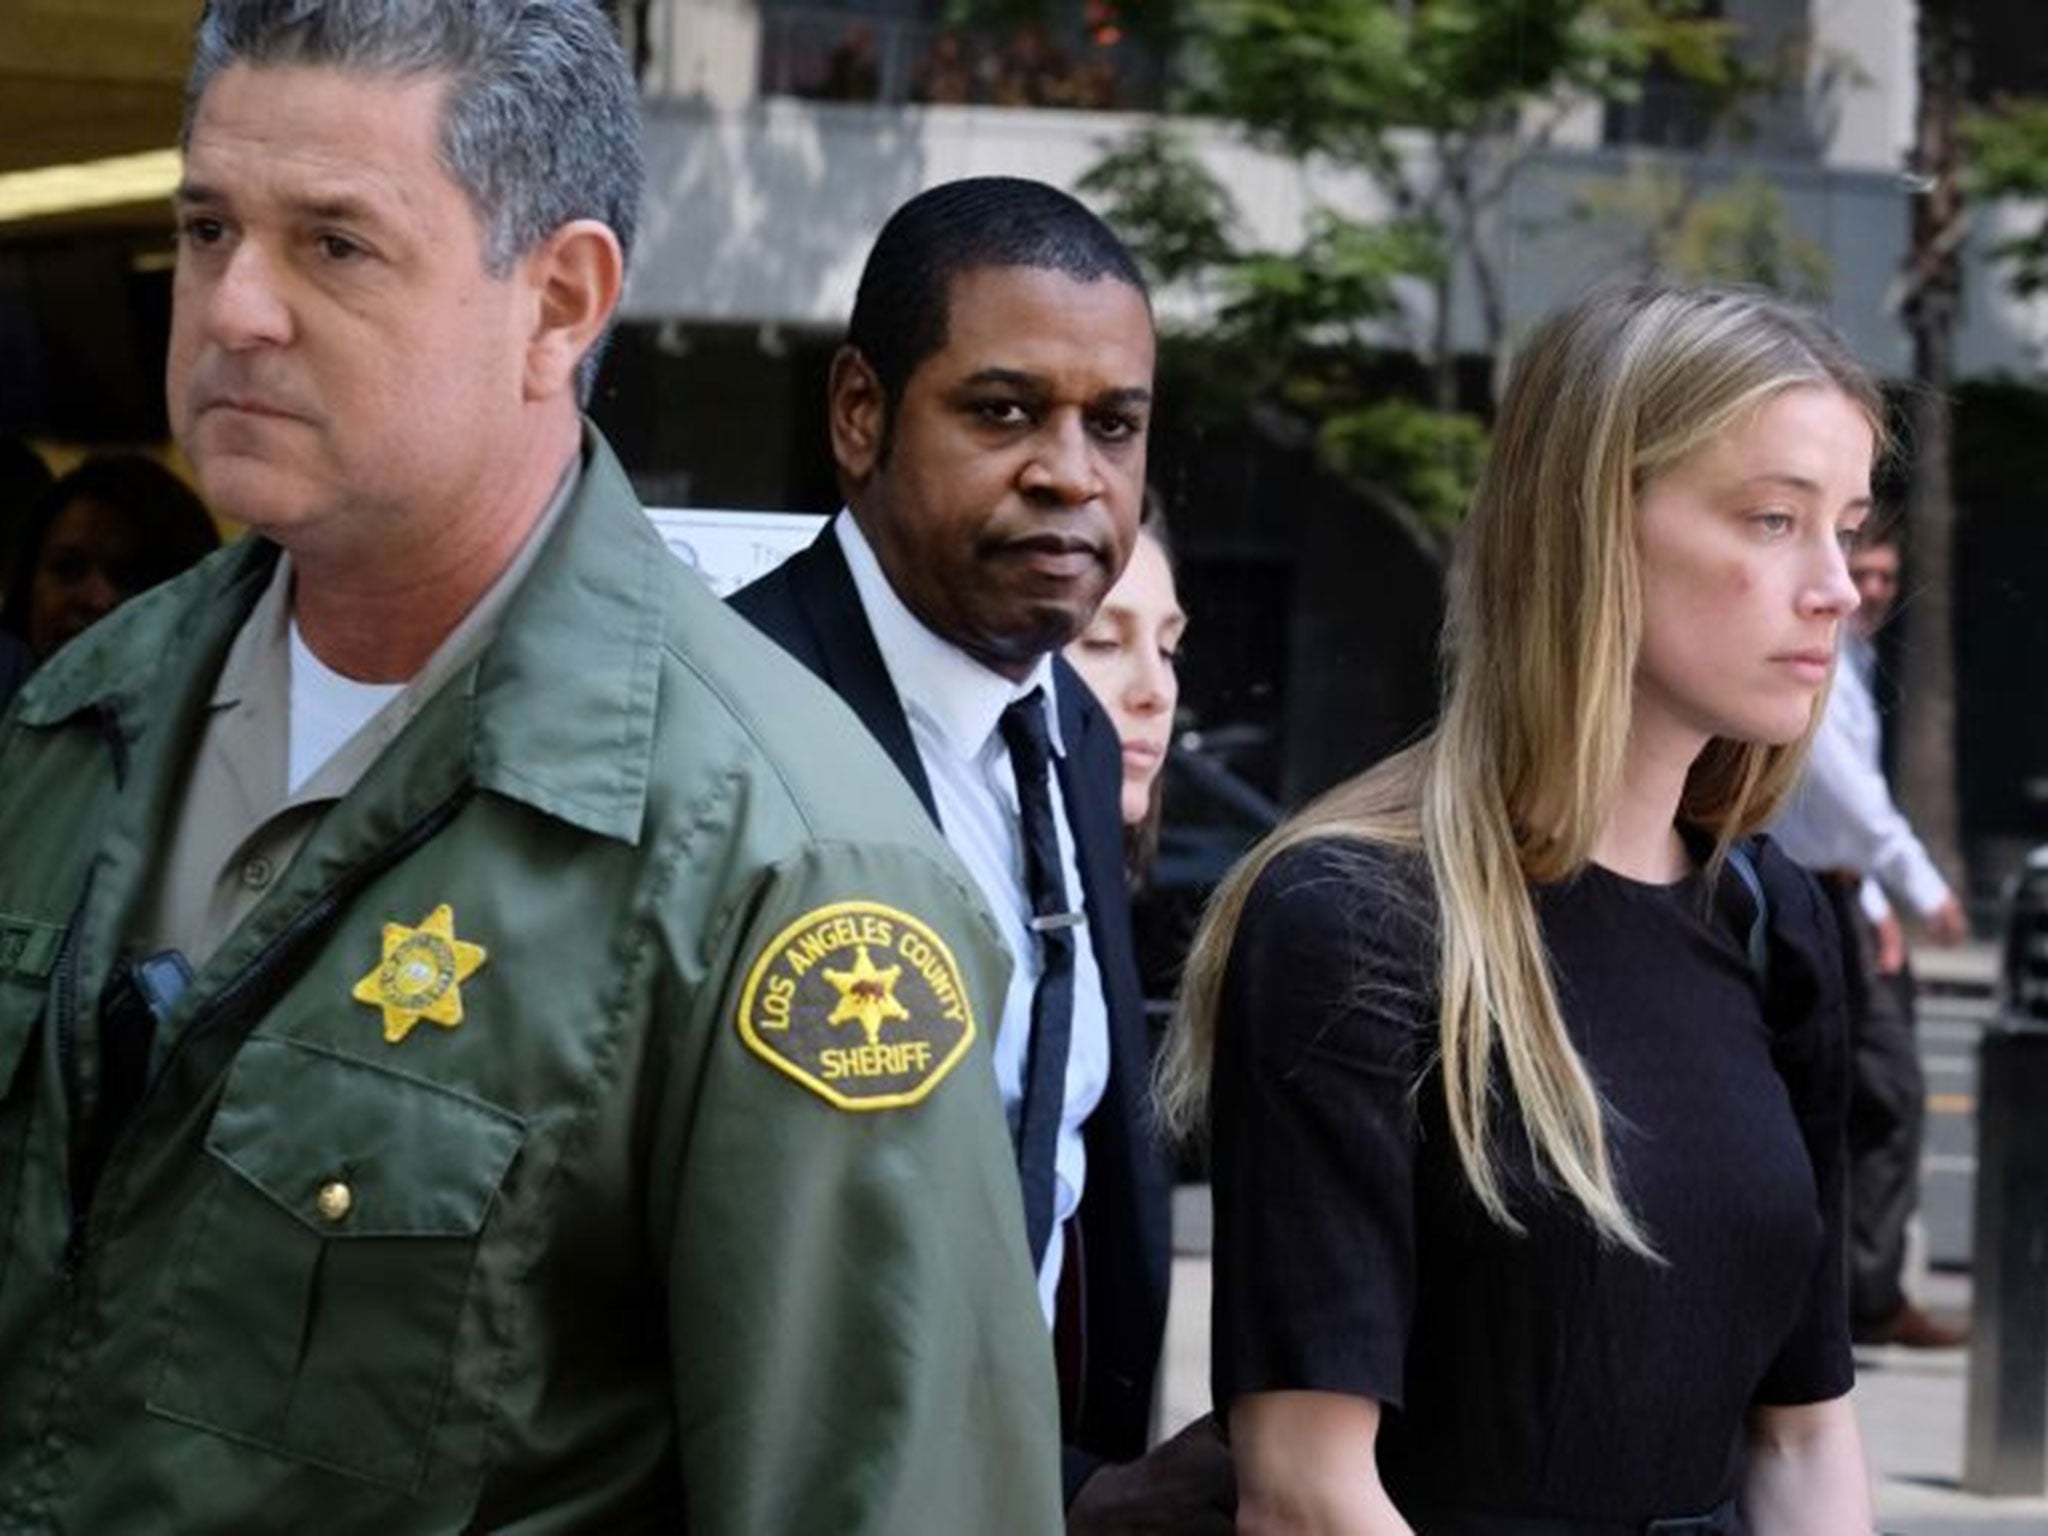 Amber Heard leaves Los Angeles Superior Court court on Friday, 27 May, 2016, after giving a sworn declaration alleging that her husband Johnny Depp threw her phone at her during a fight Saturday, striking her cheek and eye